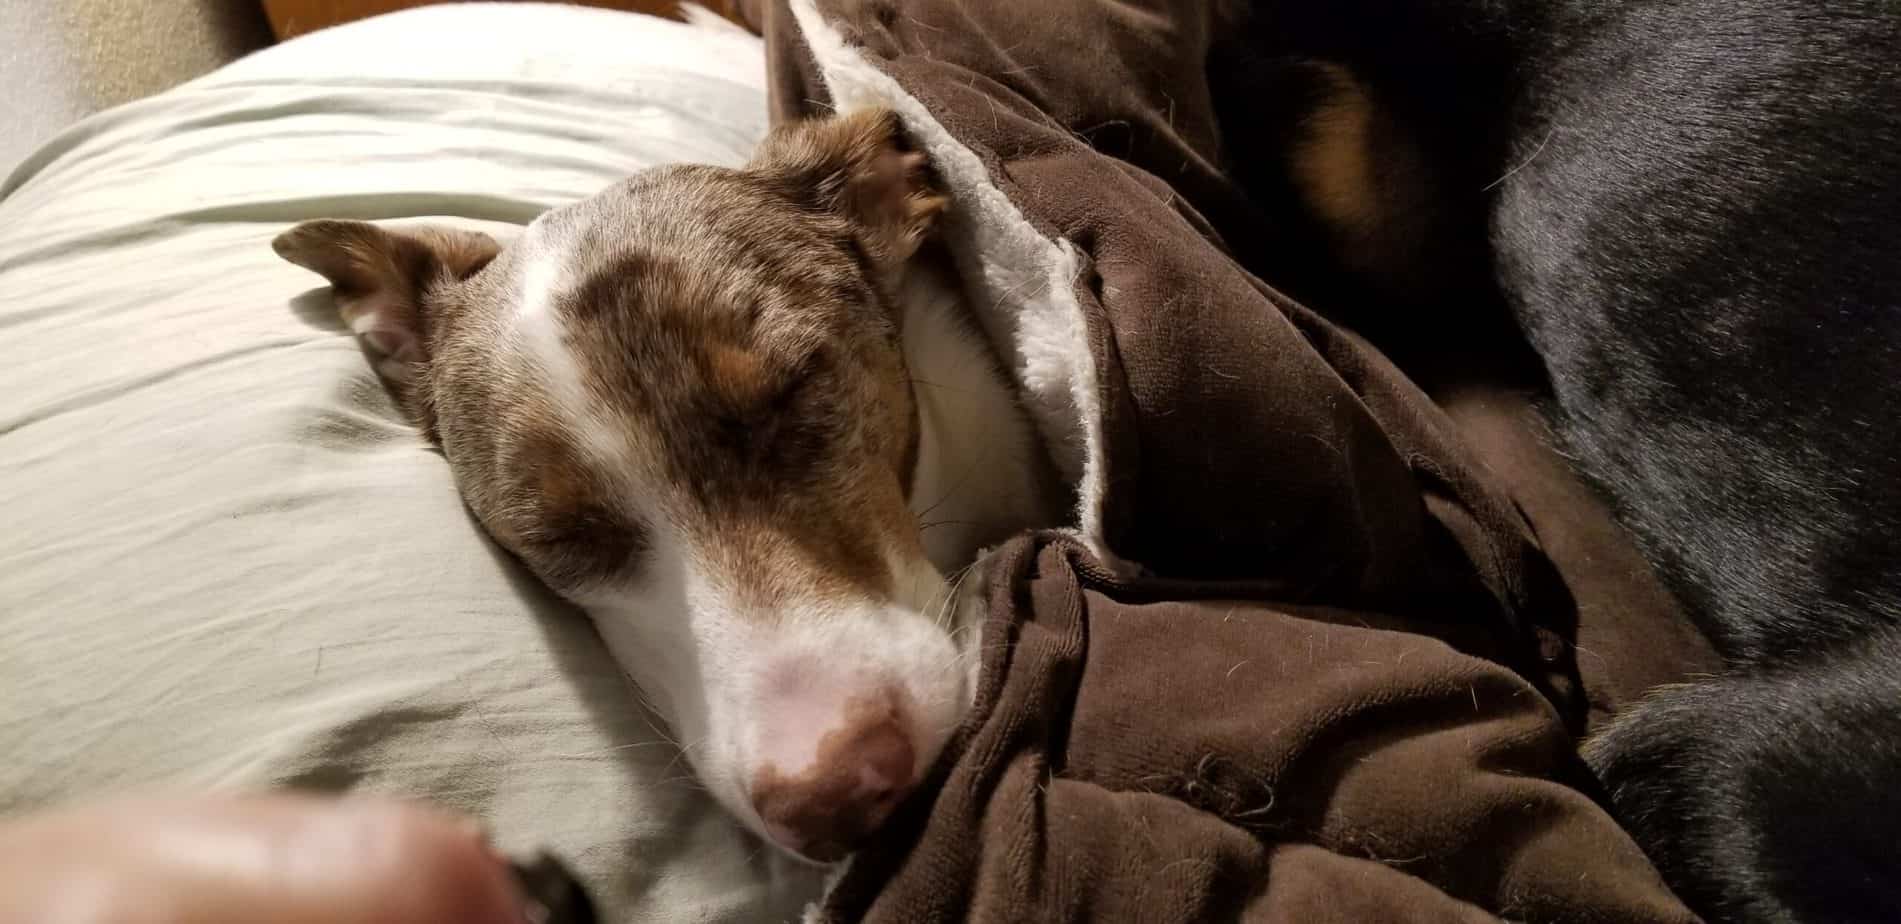 Dog sleeping in the bed with covers